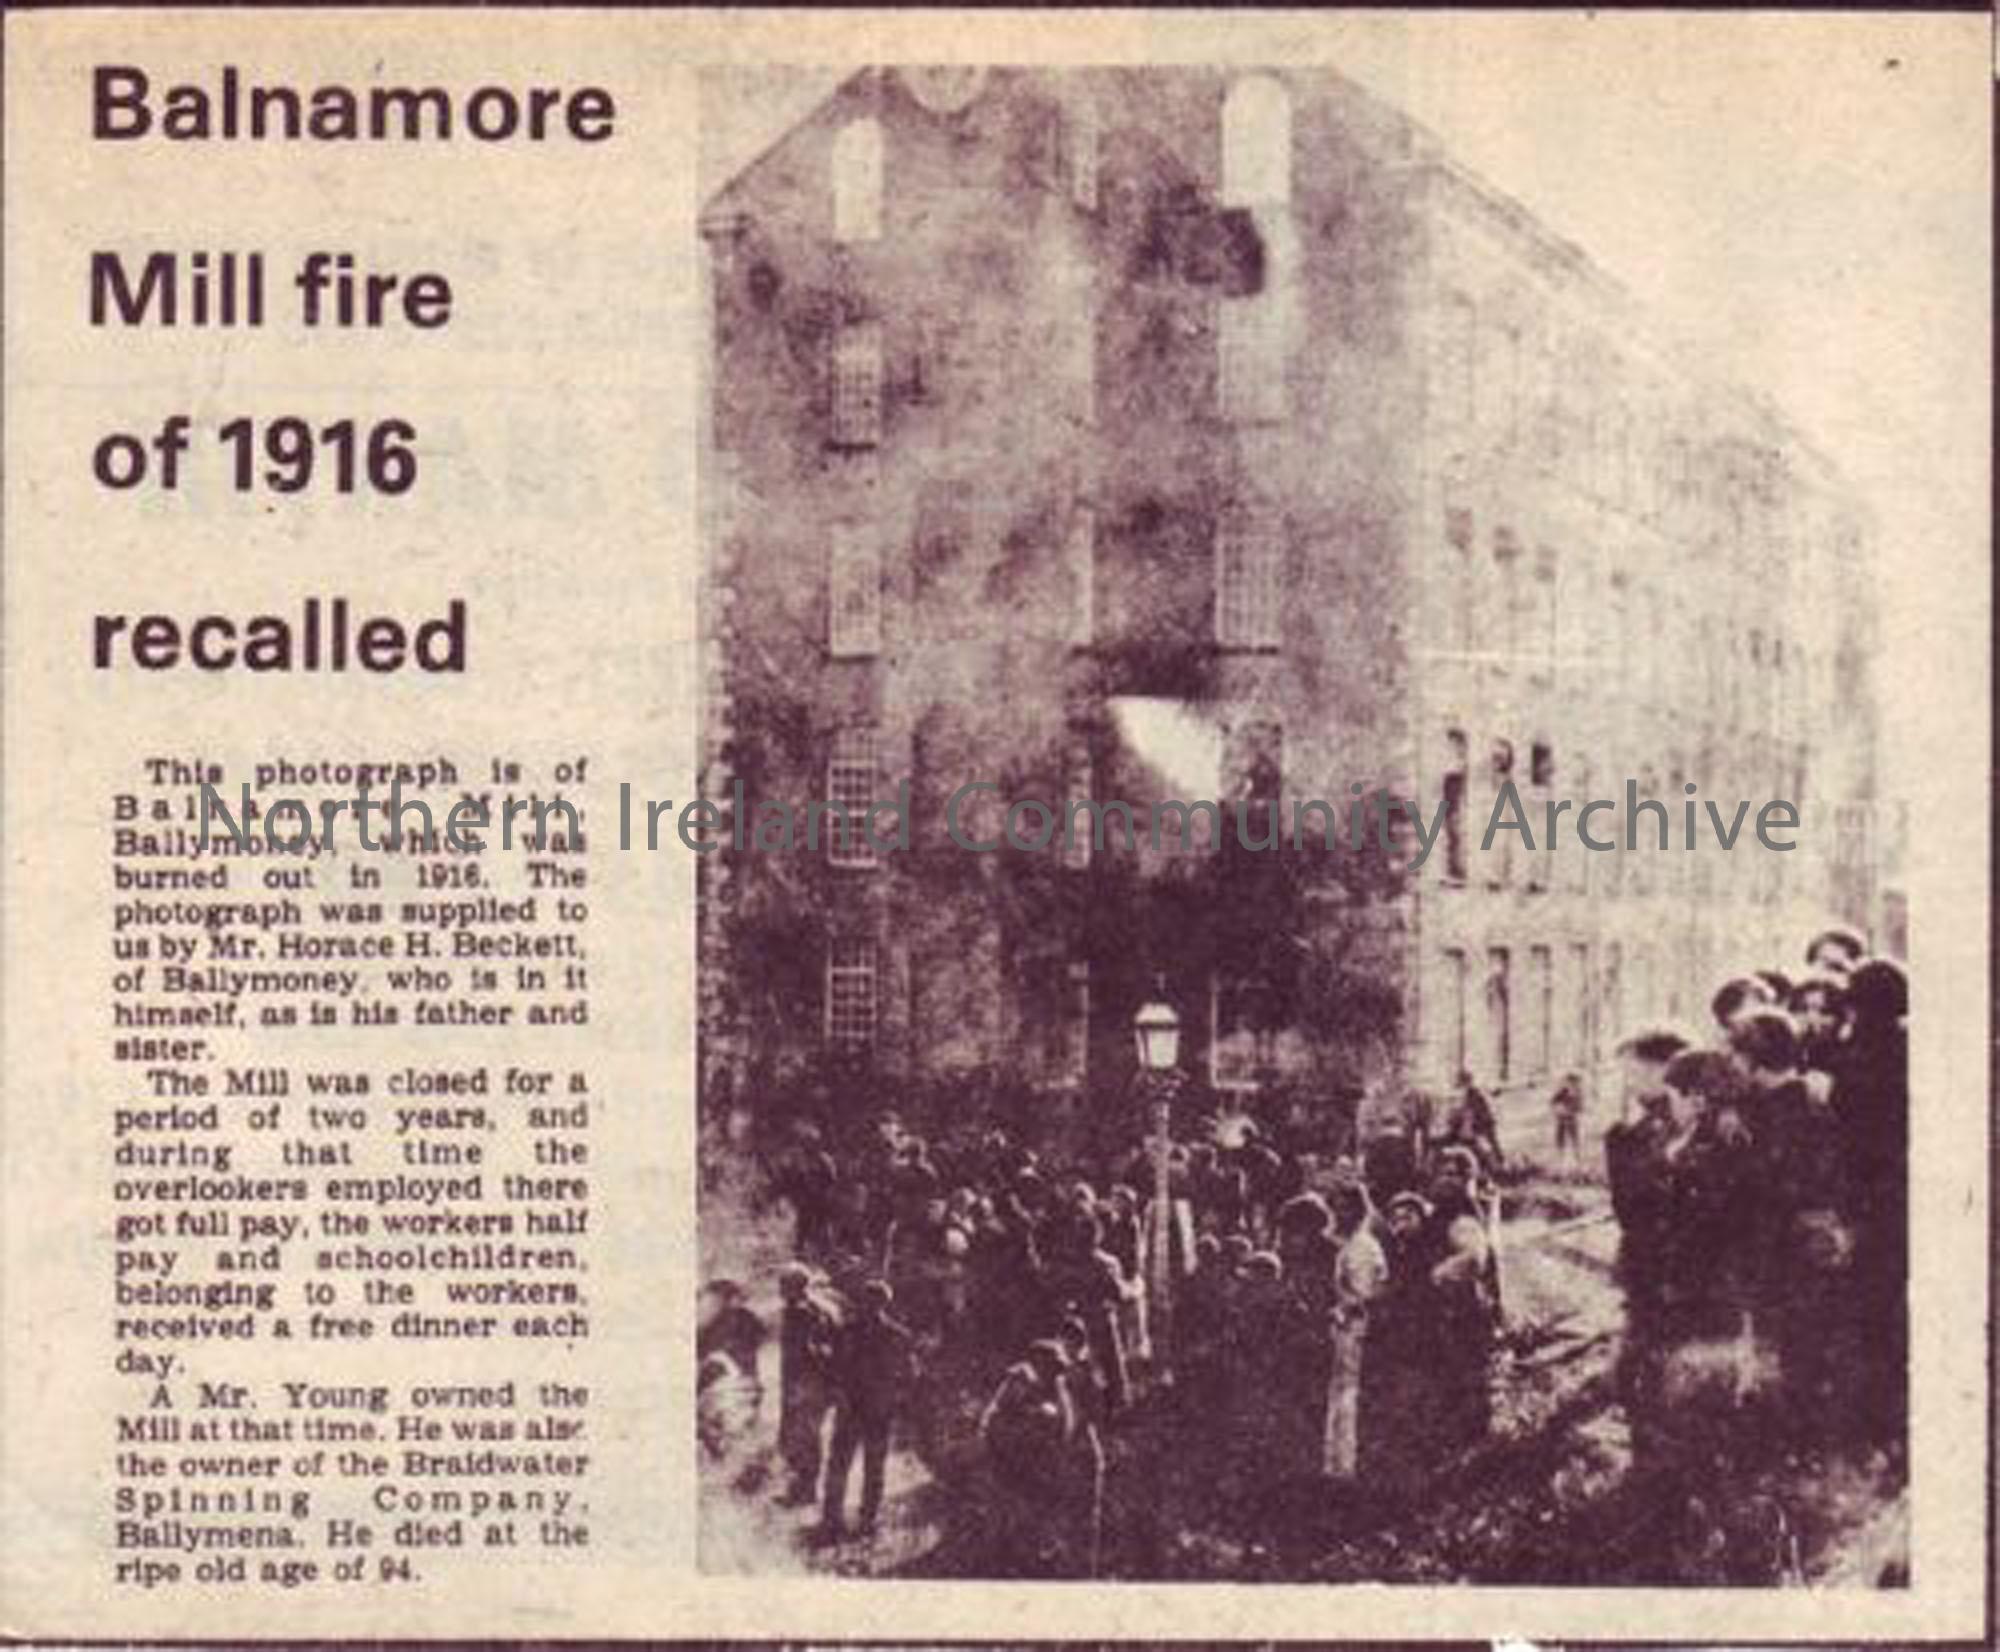 Newspaper clipping recalling the Balnamore Mill fire of 1916 (1484)